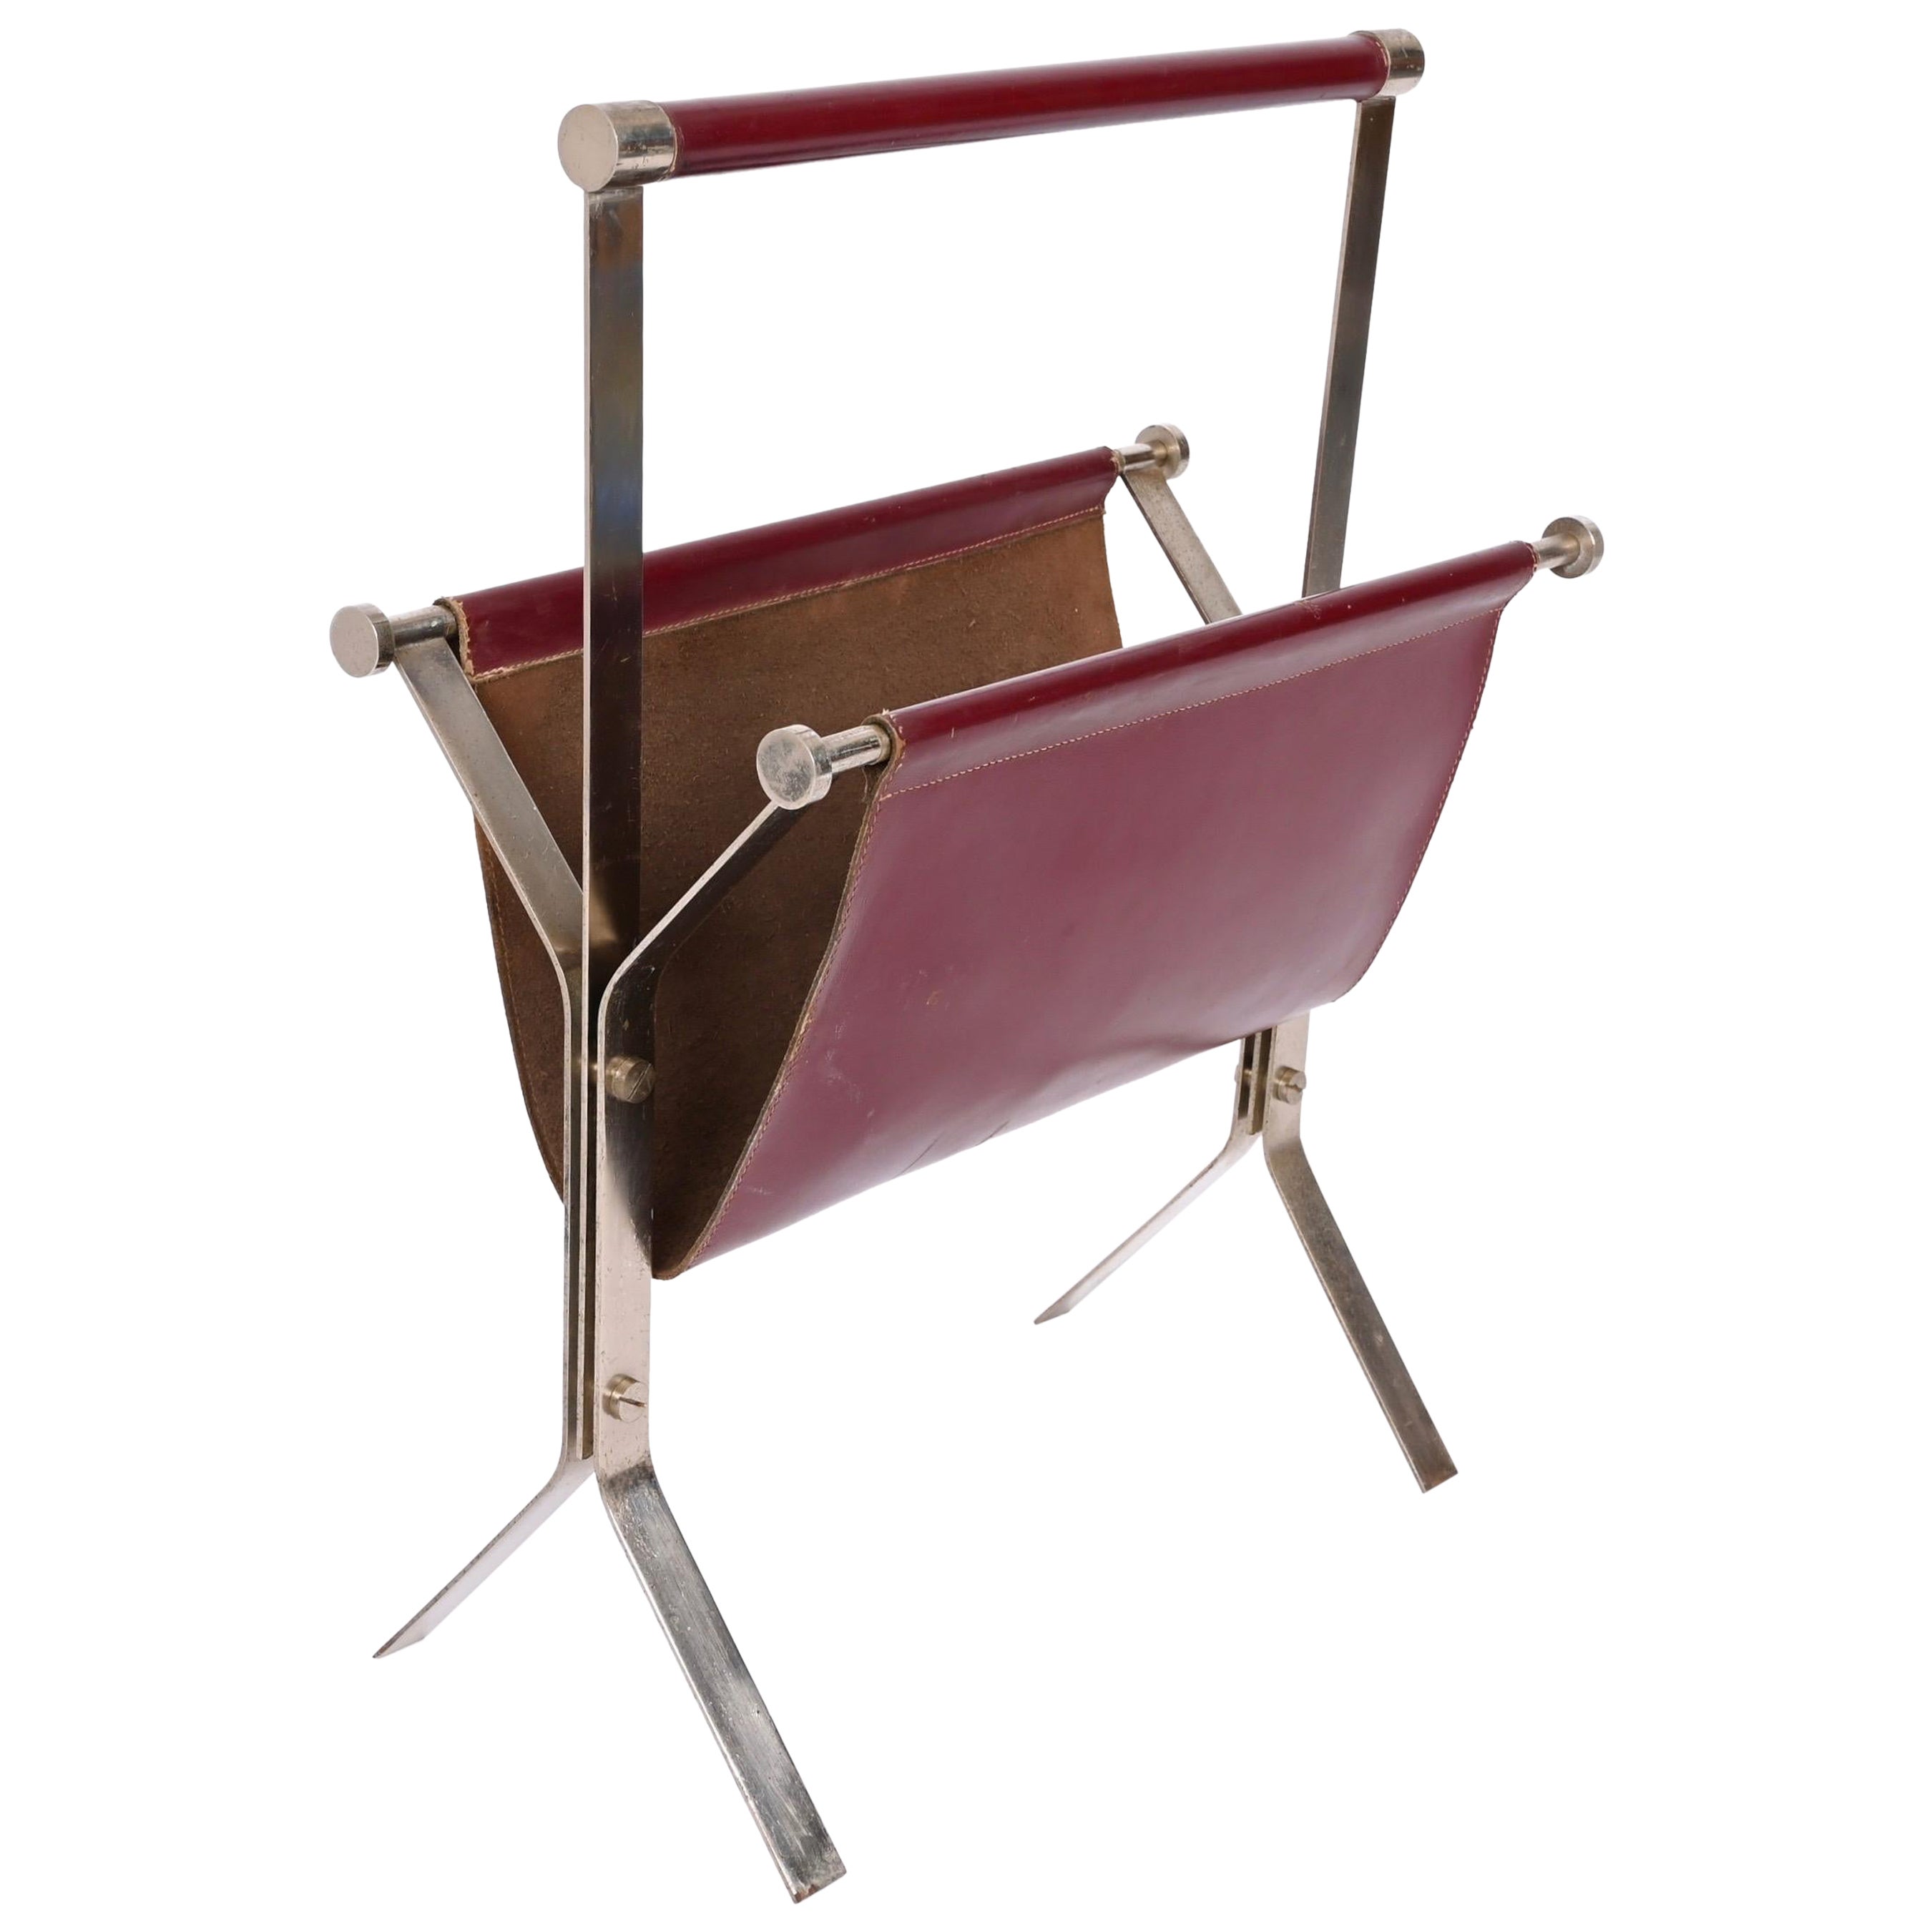 Amazing Midcentury chromed steel and red leather magazine rack. The famous Venetian designer Alessandro Albrizzi designed this piece in Italy during the 1970s.

This fantastic piece combines elegant burgundy red leather with chrome structure. This